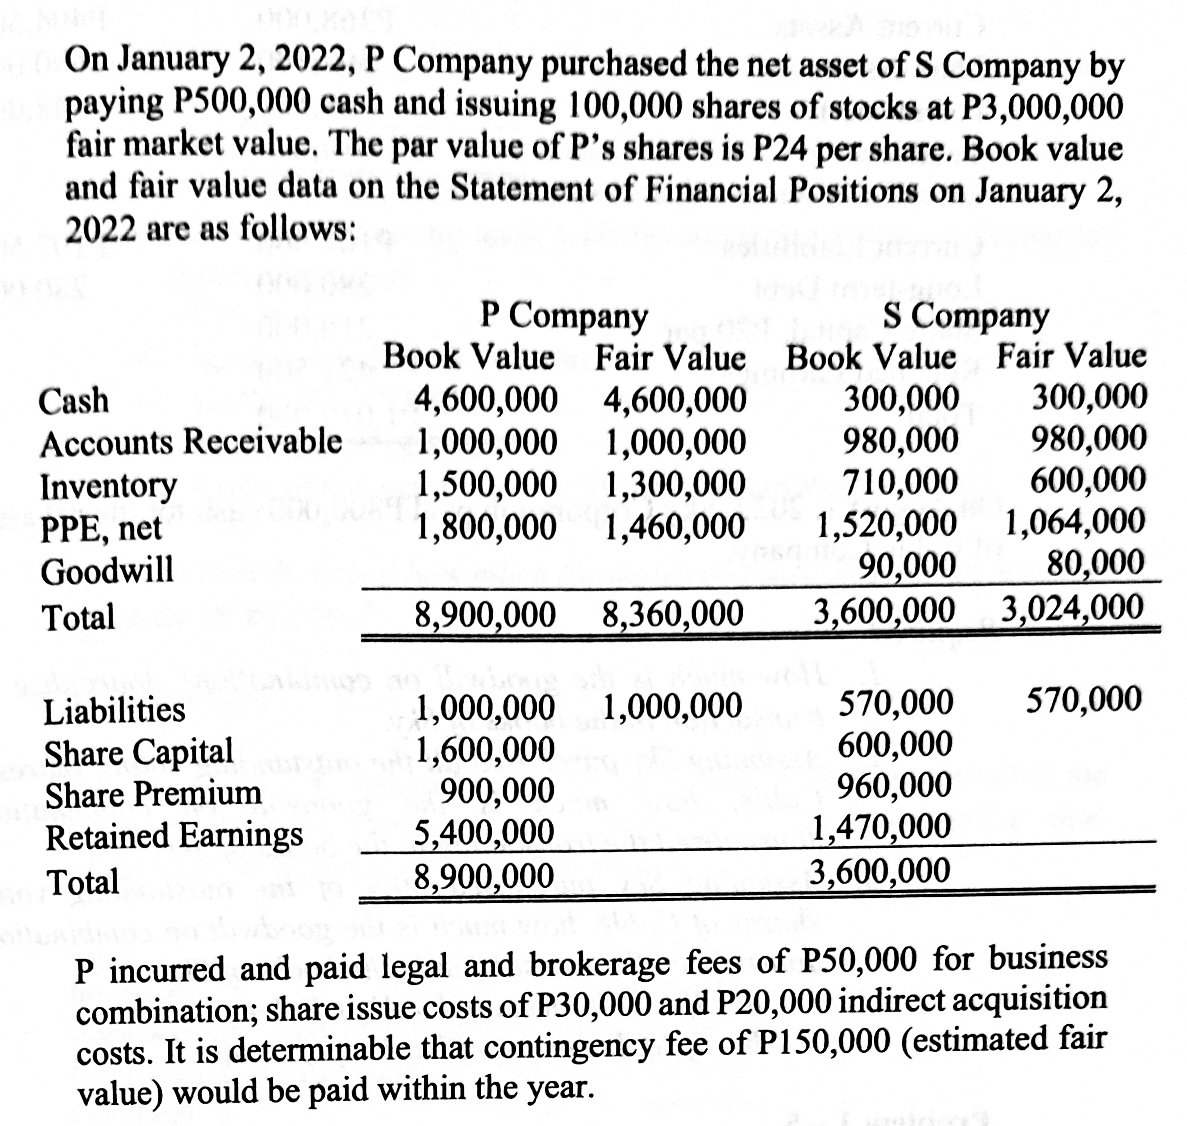 On January 2, 2022, P Company purchased the net asset of S Company by
paying P500,000 cash and issuing 100,000 shares of stocks at P3,000,000
fair market value. The par value of P's shares is P24 per share. Book value
and fair value data on the Statement of Financial Positions on January 2,
2022 are as follows:
P Company
Book Value Fair Value
S Company
Book Value Fair Value
Cash
Accounts Receivable
300,000
980,000
600,000
4,600,000
300,000
980,000
710,000
1,520,000 1,064,000
90,000
3,600,000 3,024,000
4,600,000
1,000,000
1,500,000 1,300,000
1,800,000
1,000,000
Inventory
PPE, net
Goodwill
1,460,000
80,000
Total
8,900,000 8,360,000
570,000
Liabilities
Share Capital
Share Premium
Retained Earnings
570,000
600,000
960,000
1,470,000
3,600,000
1,000,000
1,000,000
1,600,000
900,000
5,400,000
8,900,000
Total
P incurred and paid legal and brokerage fees of P50,000 for business
combination; share issue costs of P30,000 and P20,000 indirect acquisition
costs. It is determinable that contingency fee of P150,000 (estimated fair
value) would be paid within the year.
